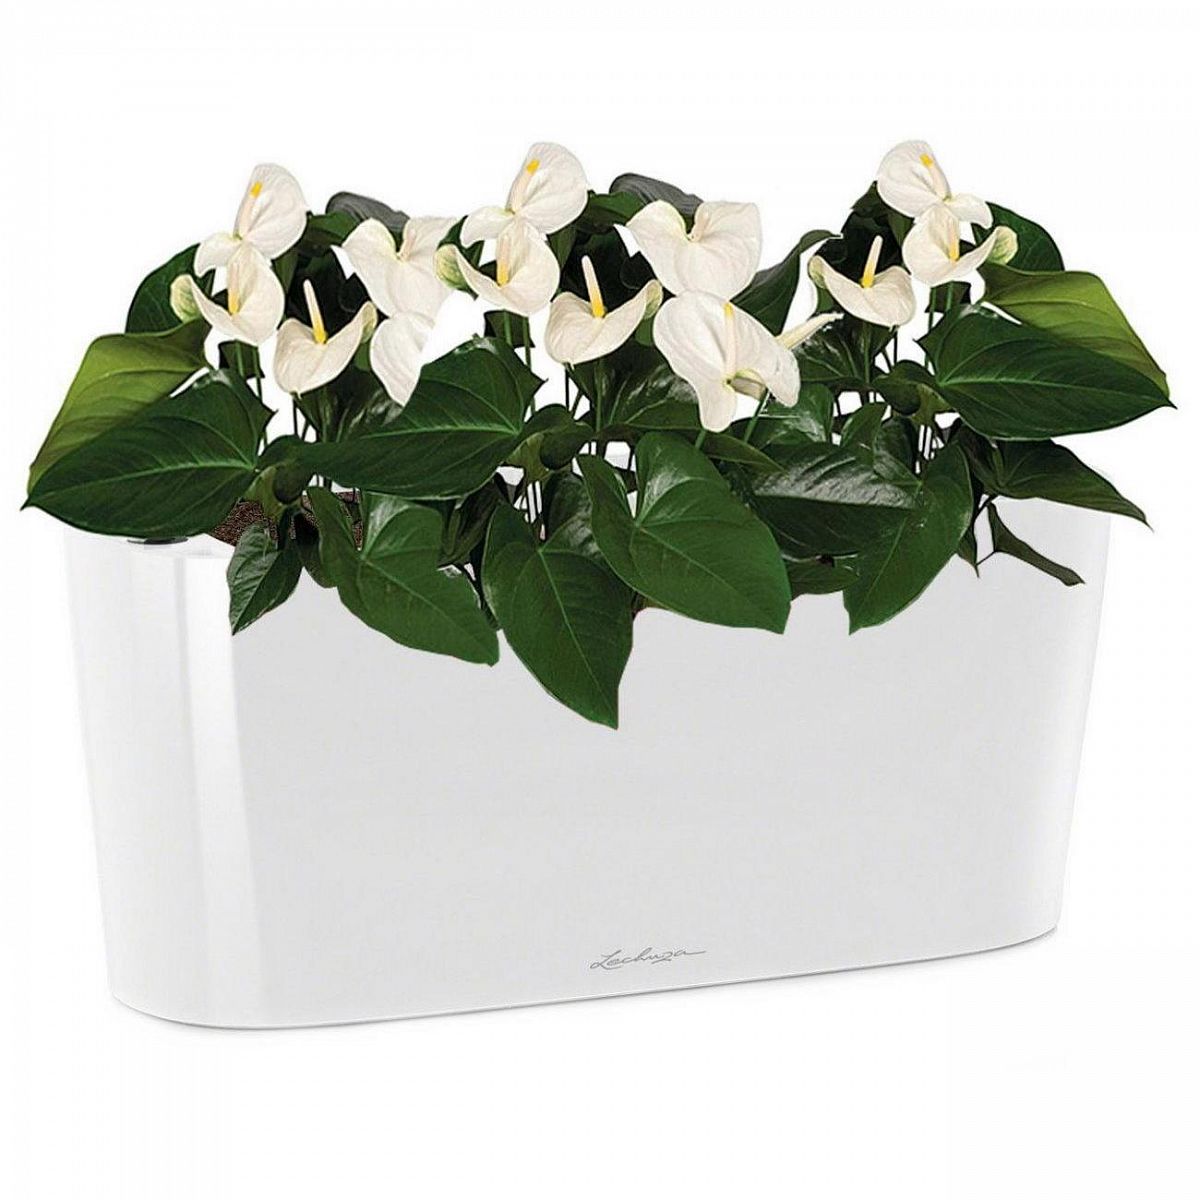 Blooming Anthurium Andraeanum White in LECHUZA DELTA Self-watering Planter, Total Height 45 cm